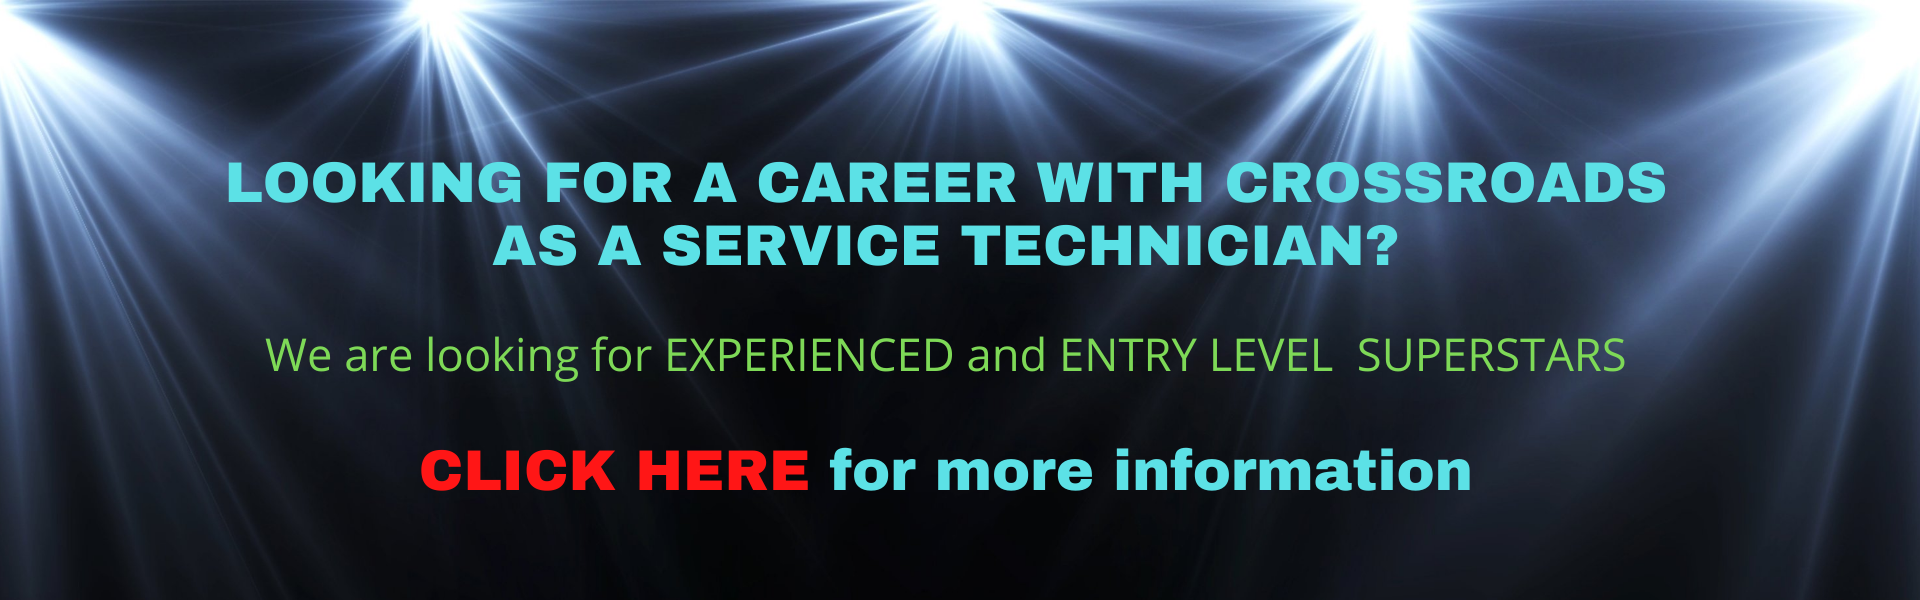 Service Technicians - Apply HERE